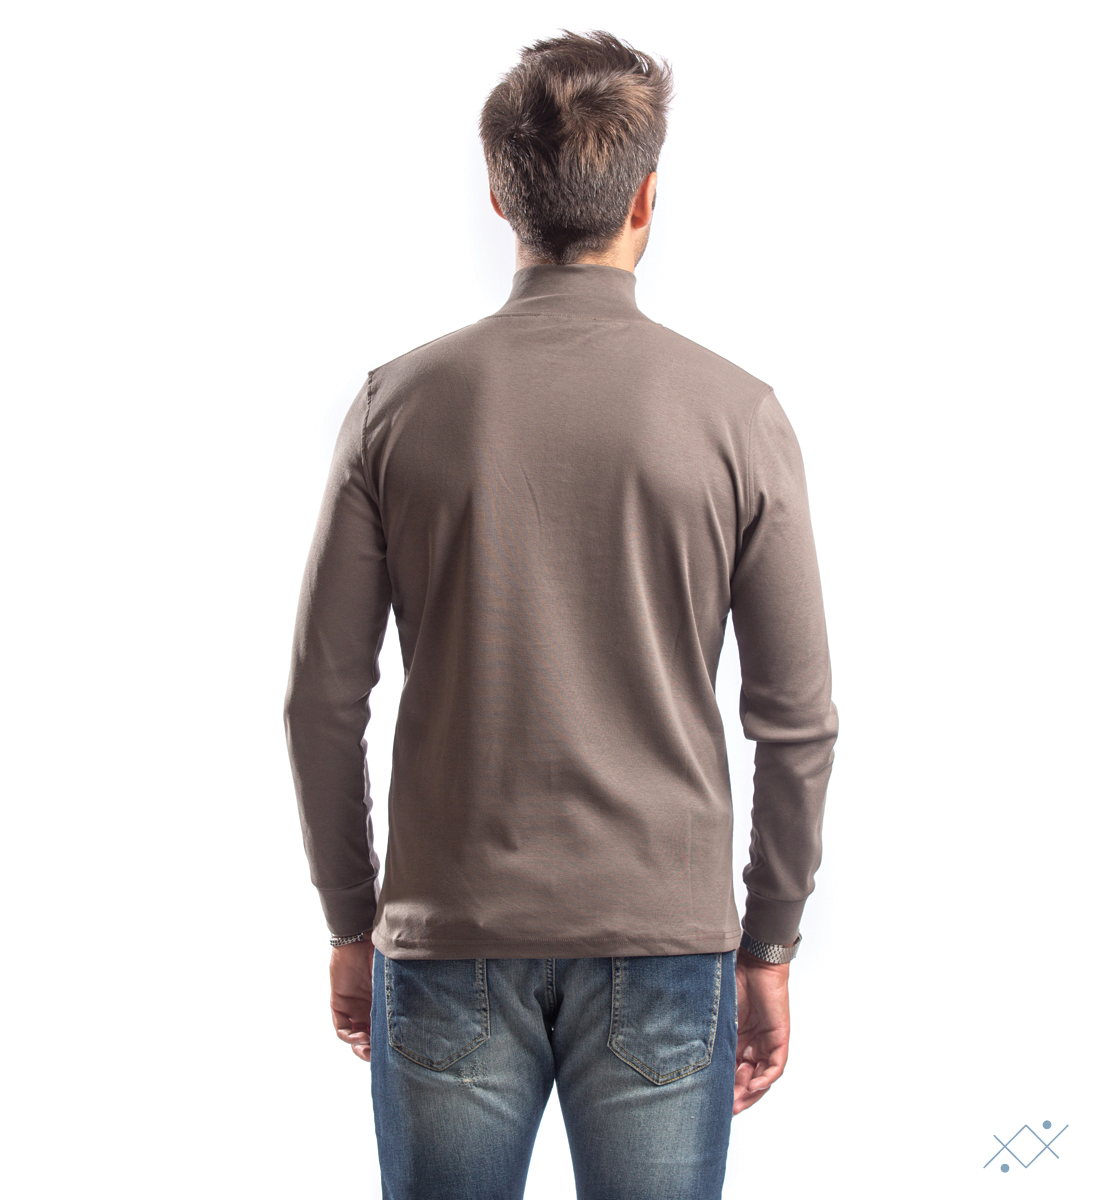 Men´s long sleeve with 5 buttons, placket in light blue velvet and raised collar - back